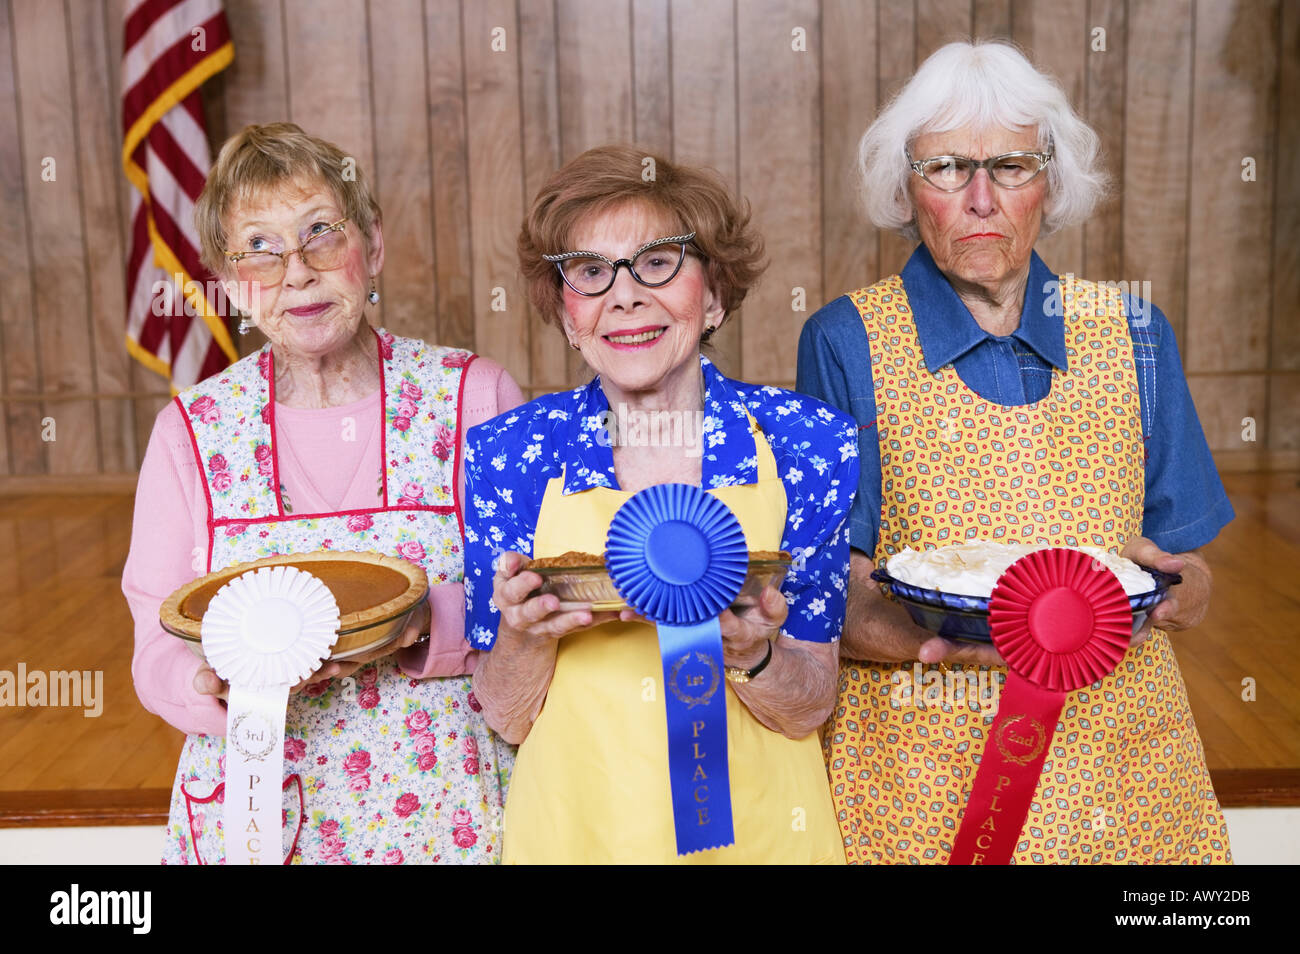 Three women with prizes for homemade pies Stock Photo